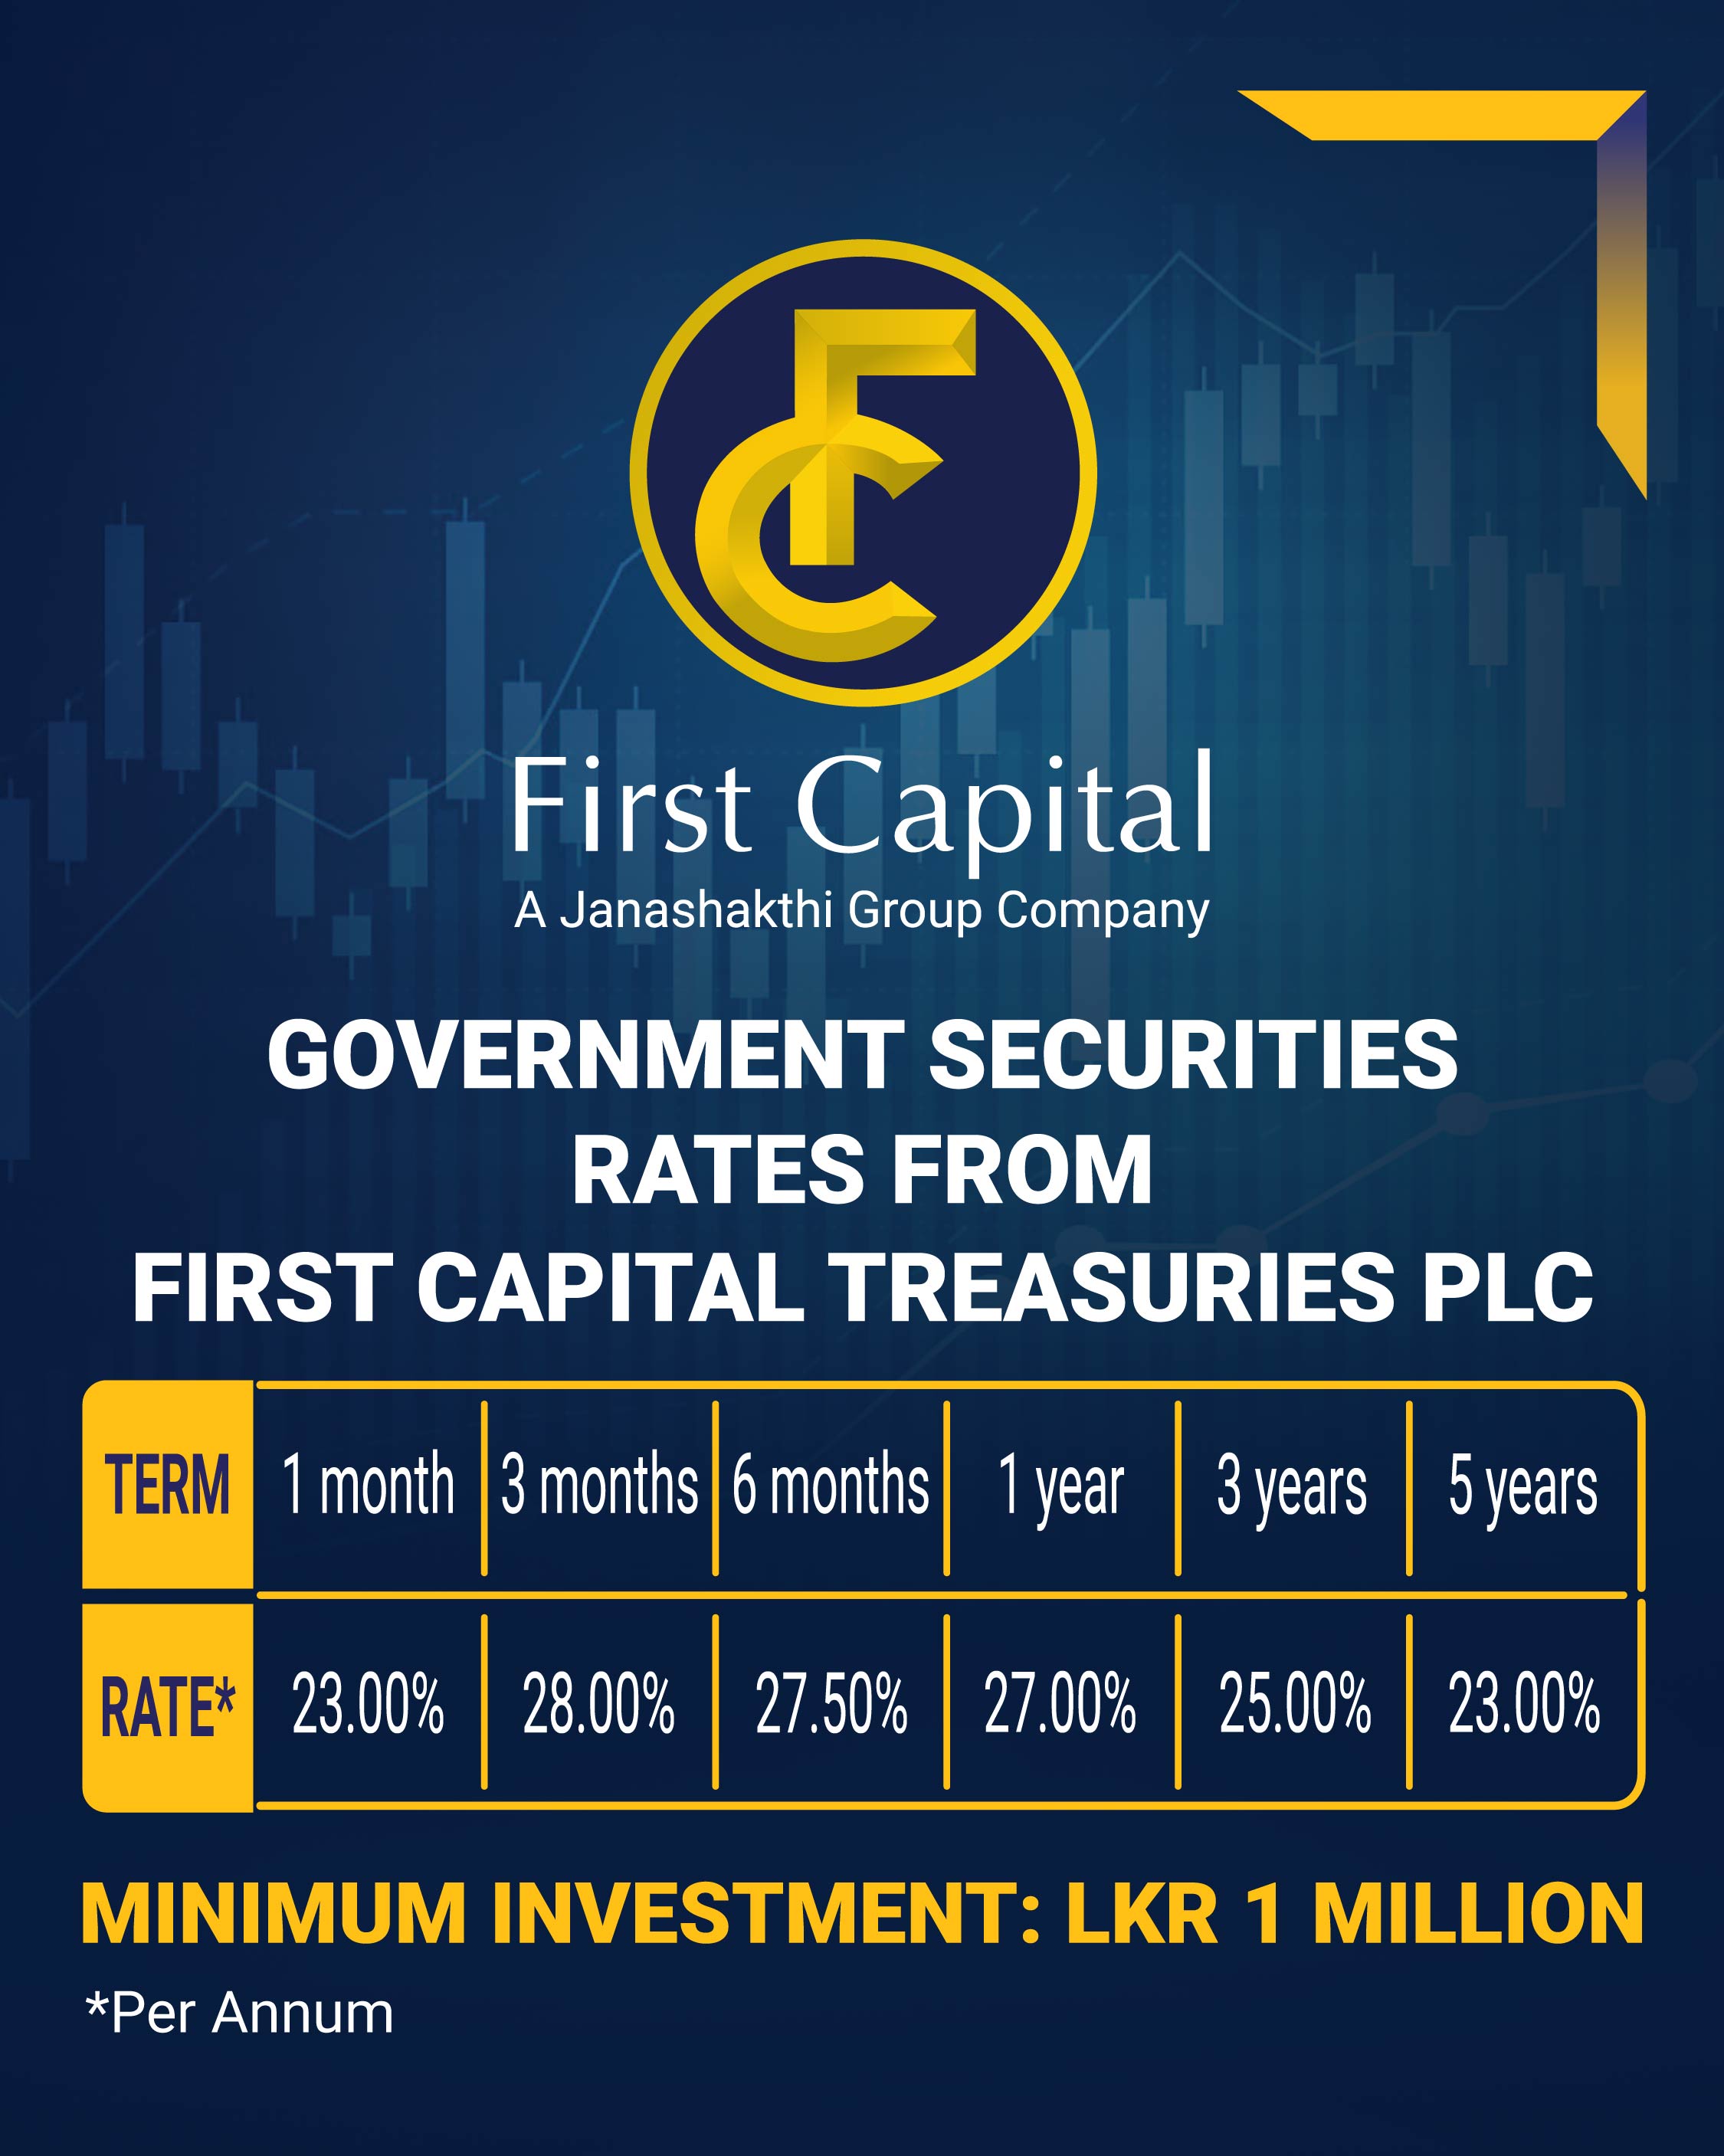 Government Securities Rates from First Capital Treasuries PLC 22 July 22